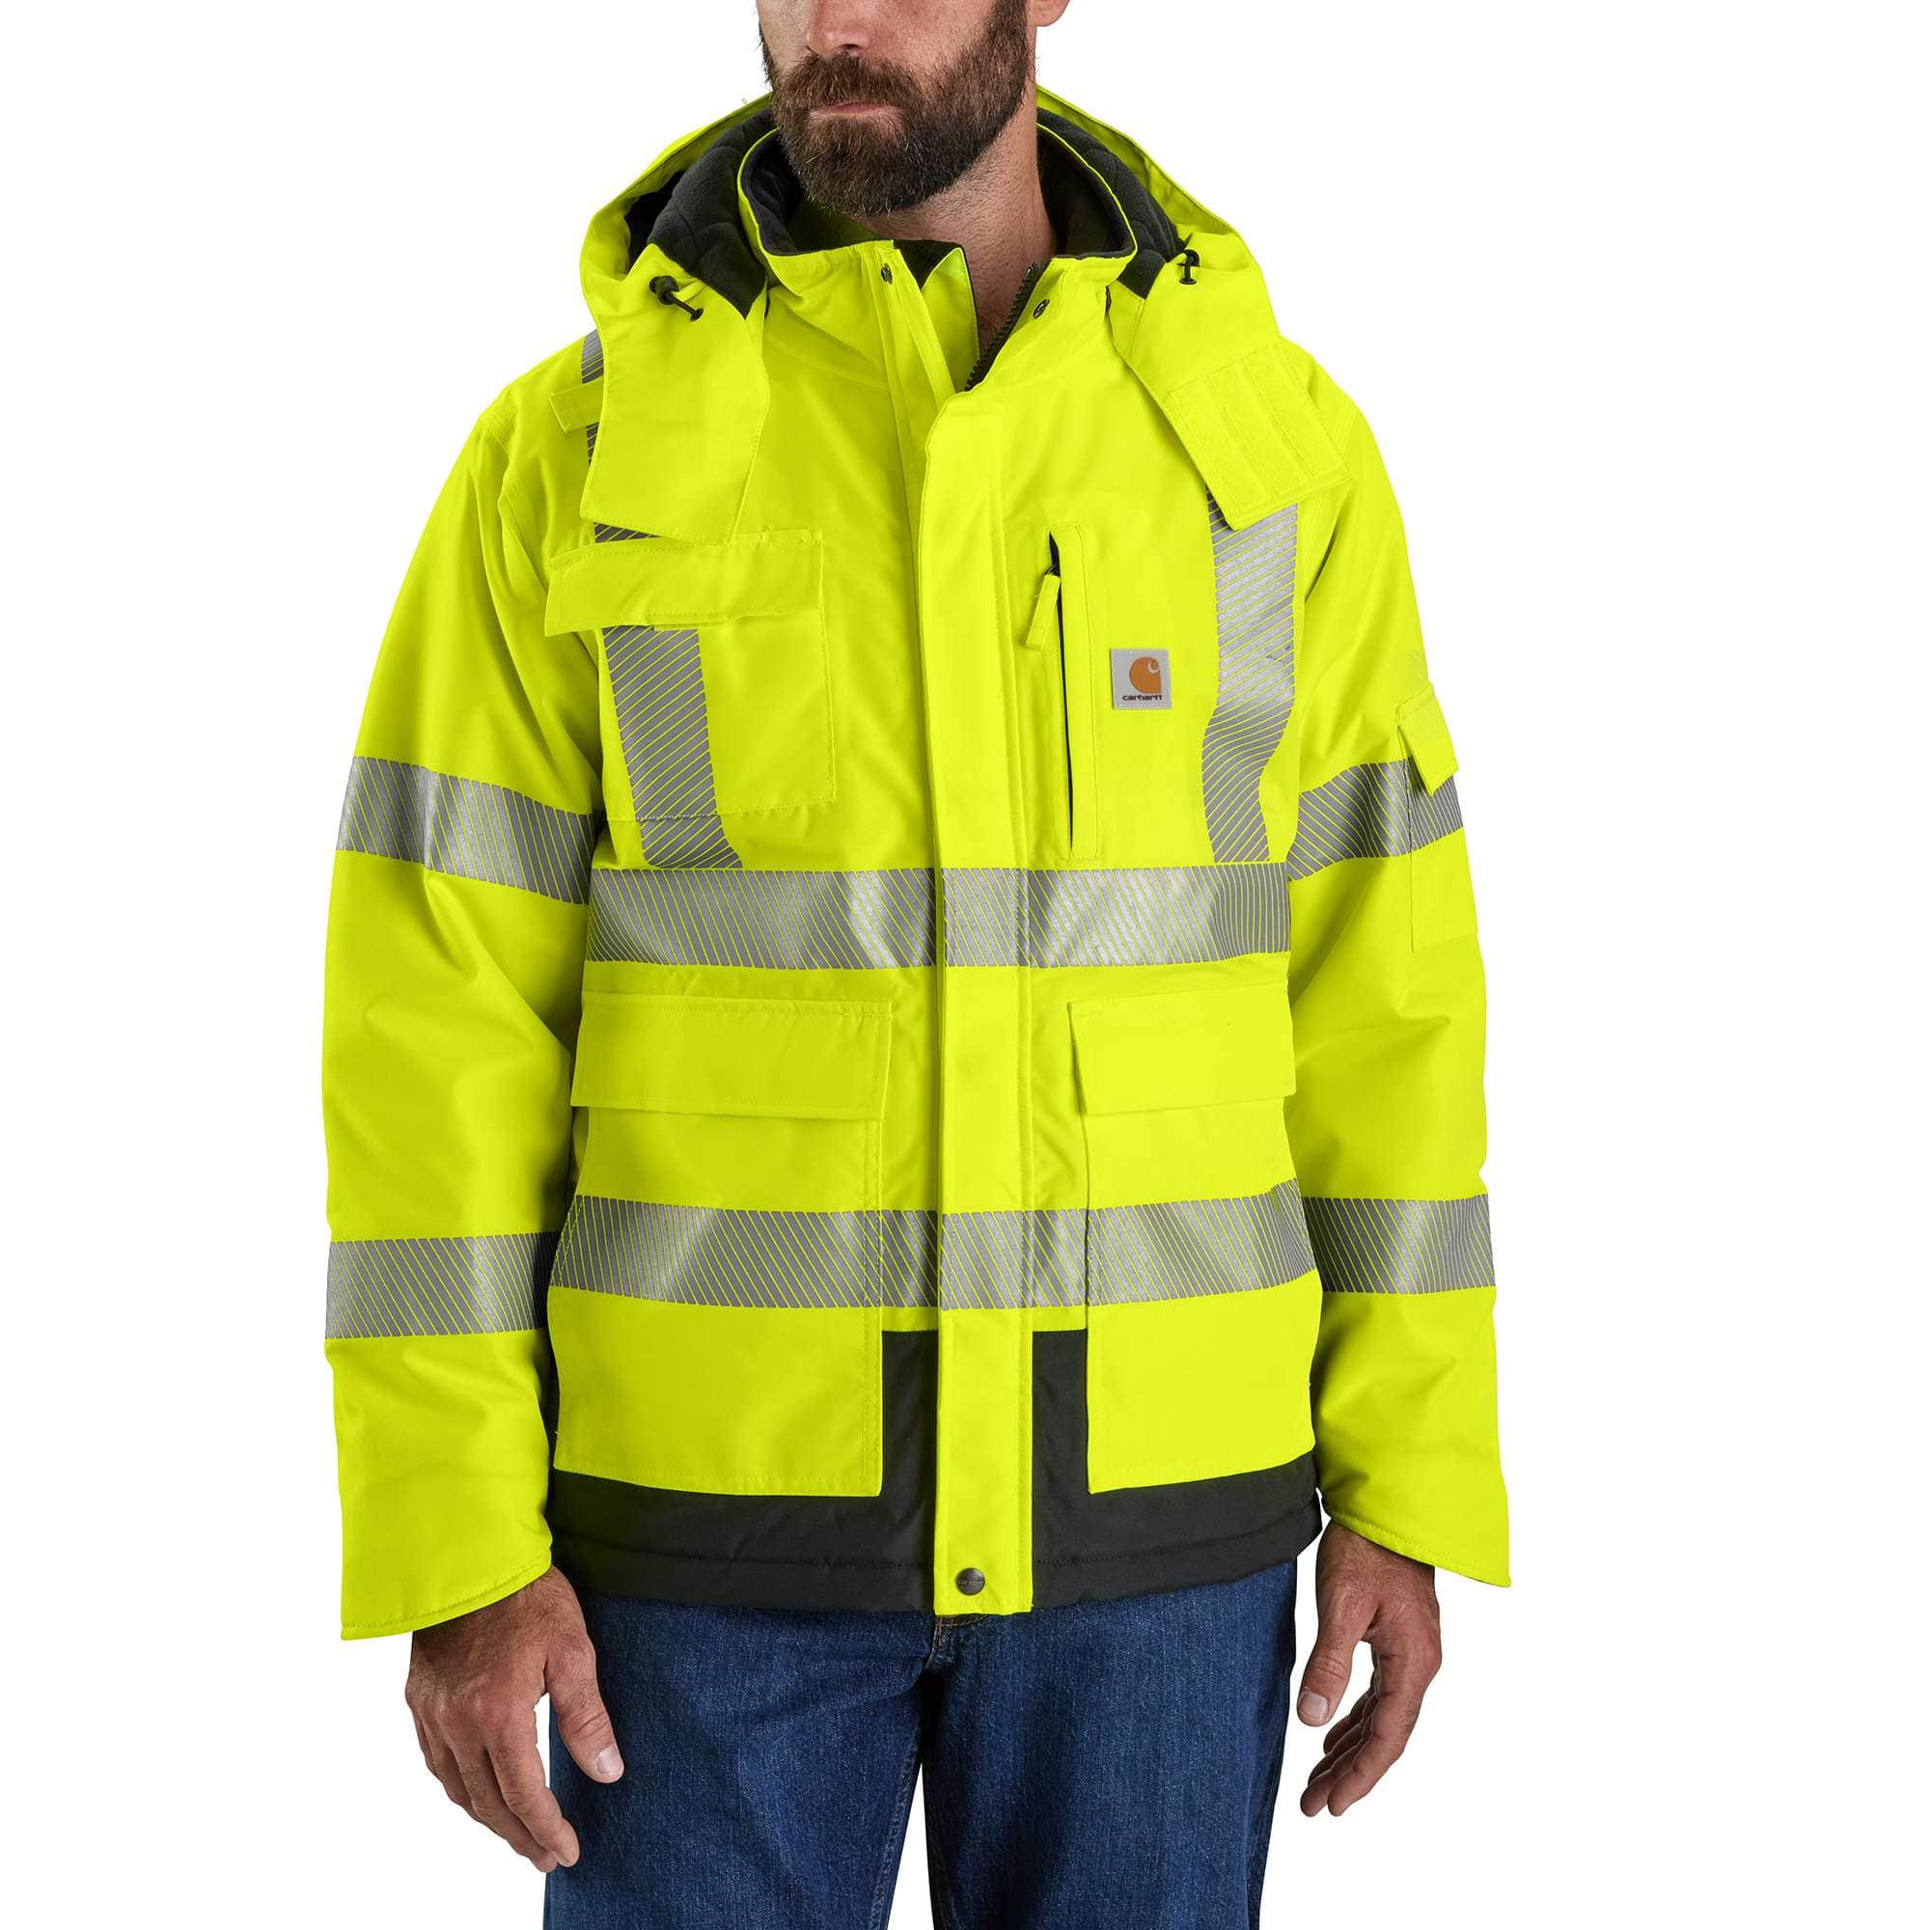 Men's High Visibility, Safety & Reflective Clothing